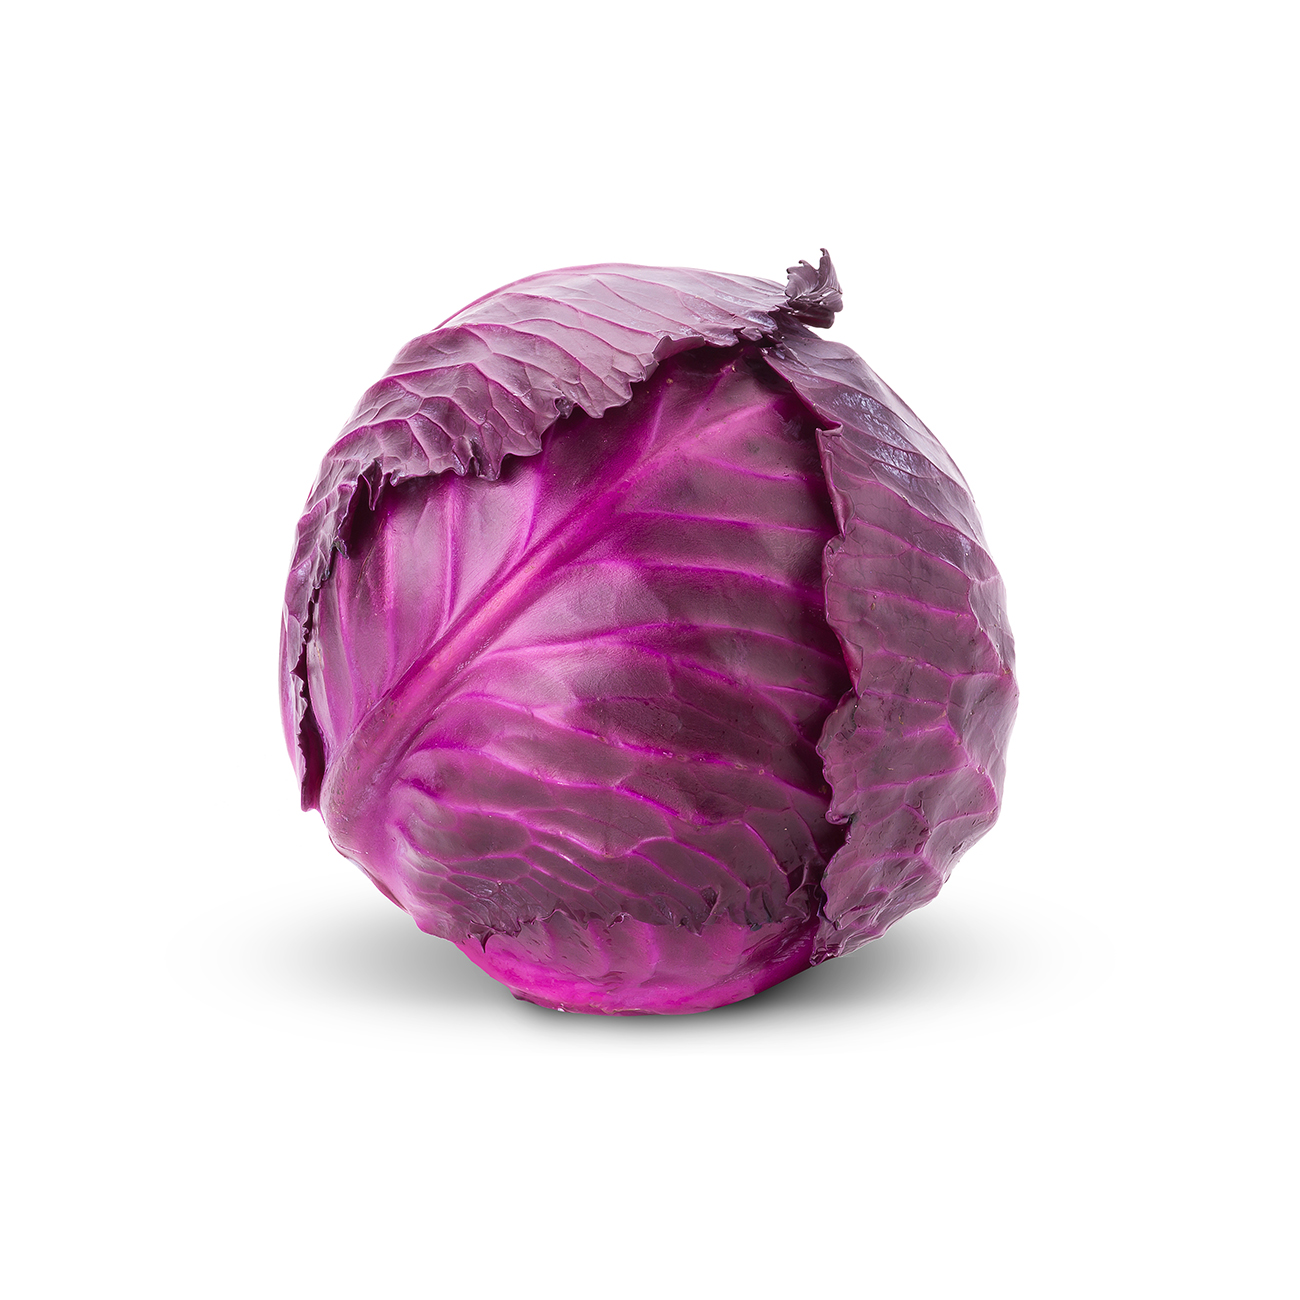 Cabbage, red